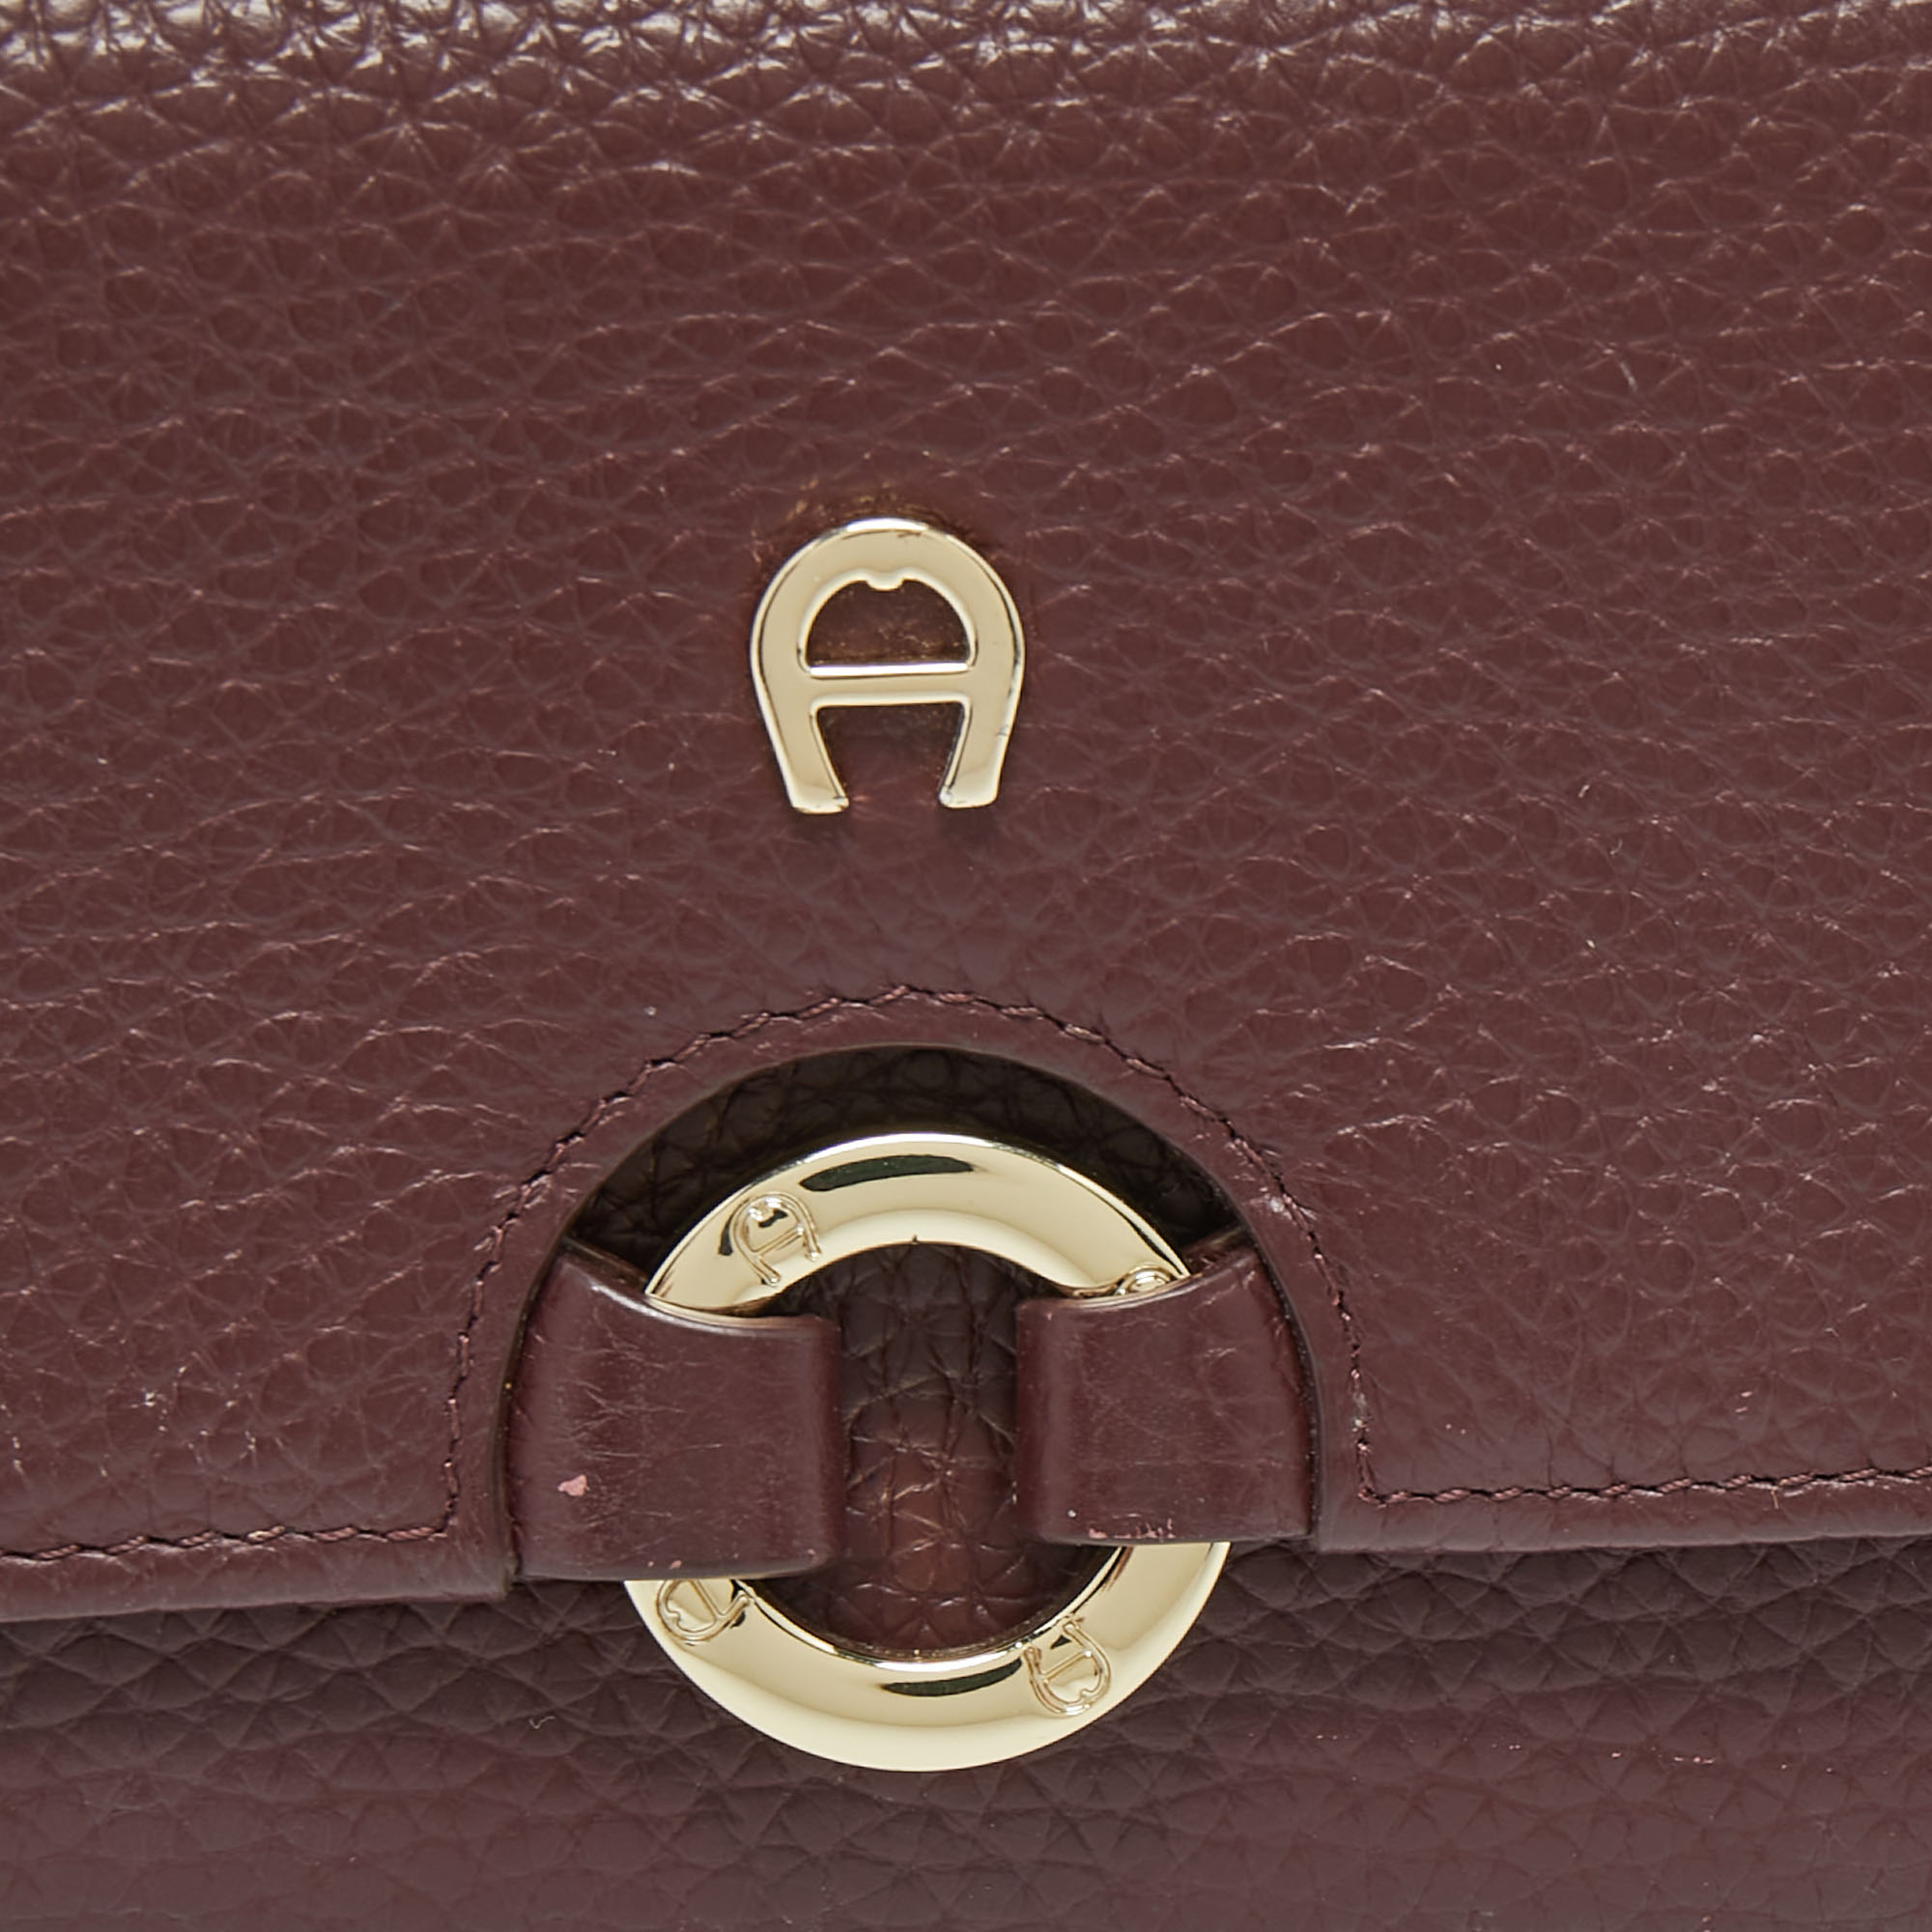 Aigner Burgundy Leather Logo Trifold Wallet